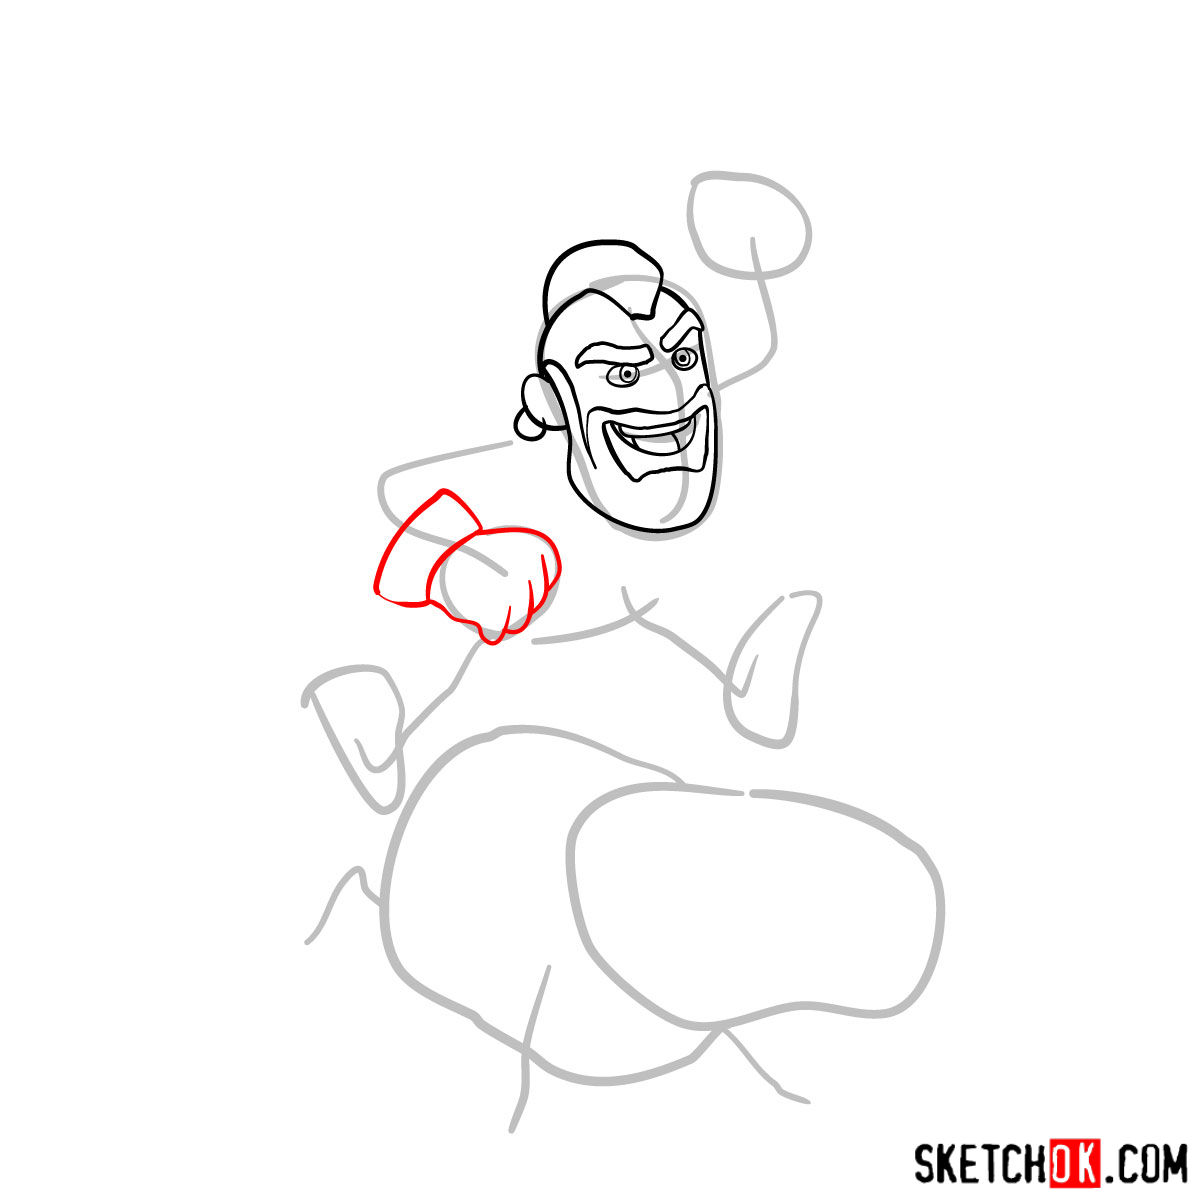 How to draw Hog Rider from Clash of Clans - step 04